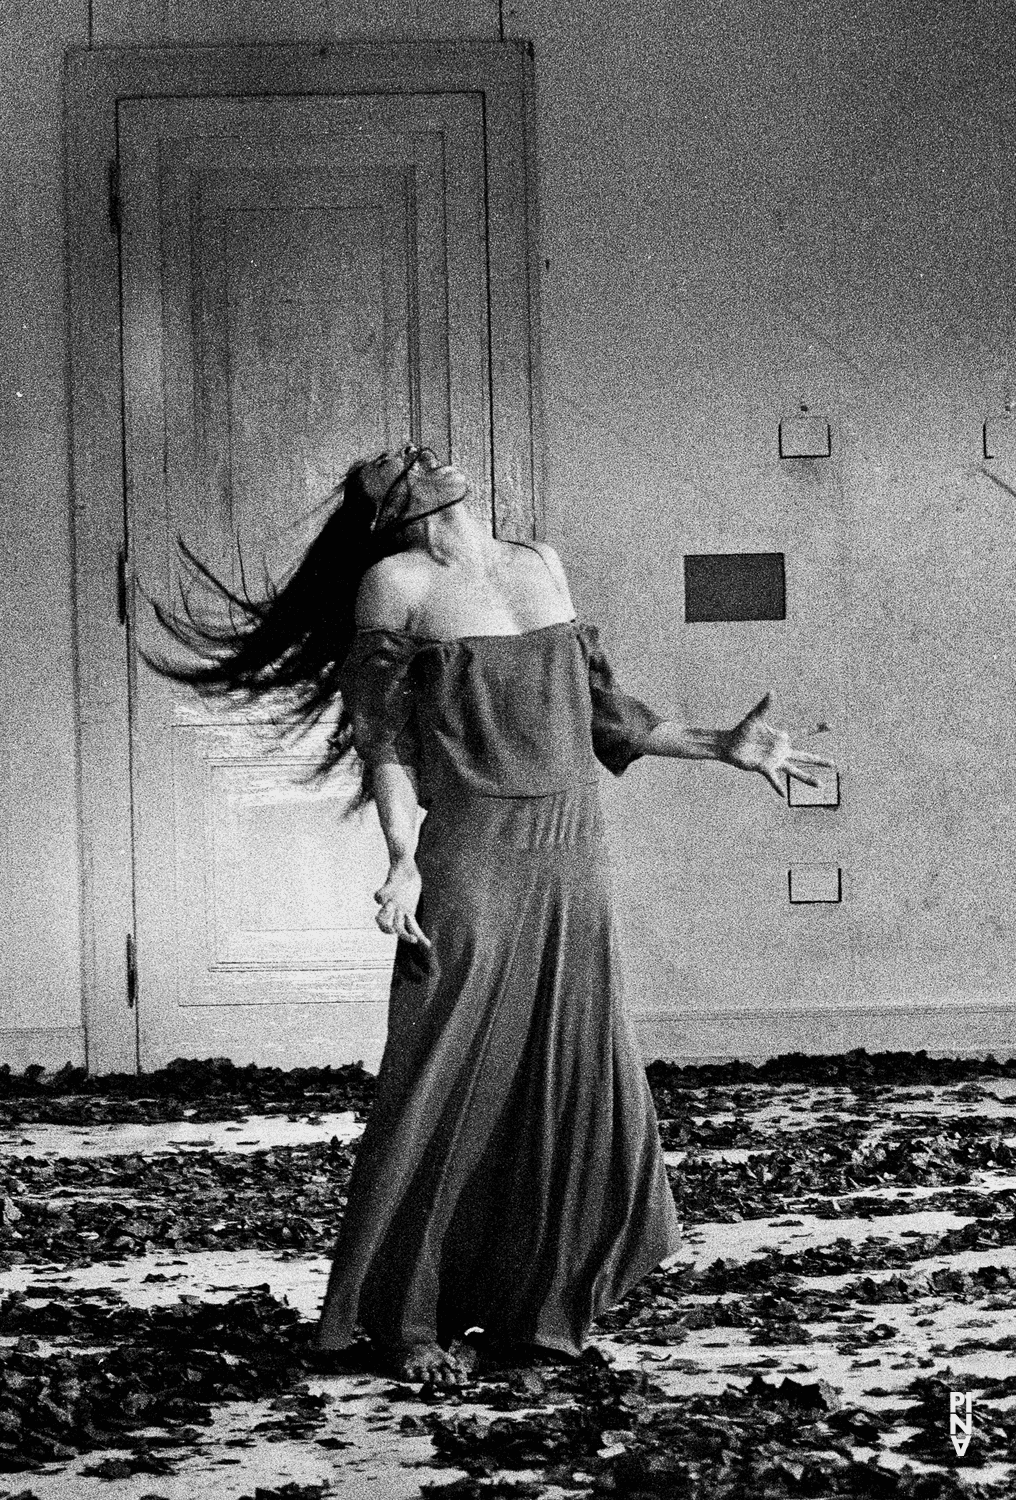 Ruth Amarante in “Bluebeard. While Listening to a Tape Recording of Béla Bartók's Opera "Duke Bluebeard's Castle"” by Pina Bausch